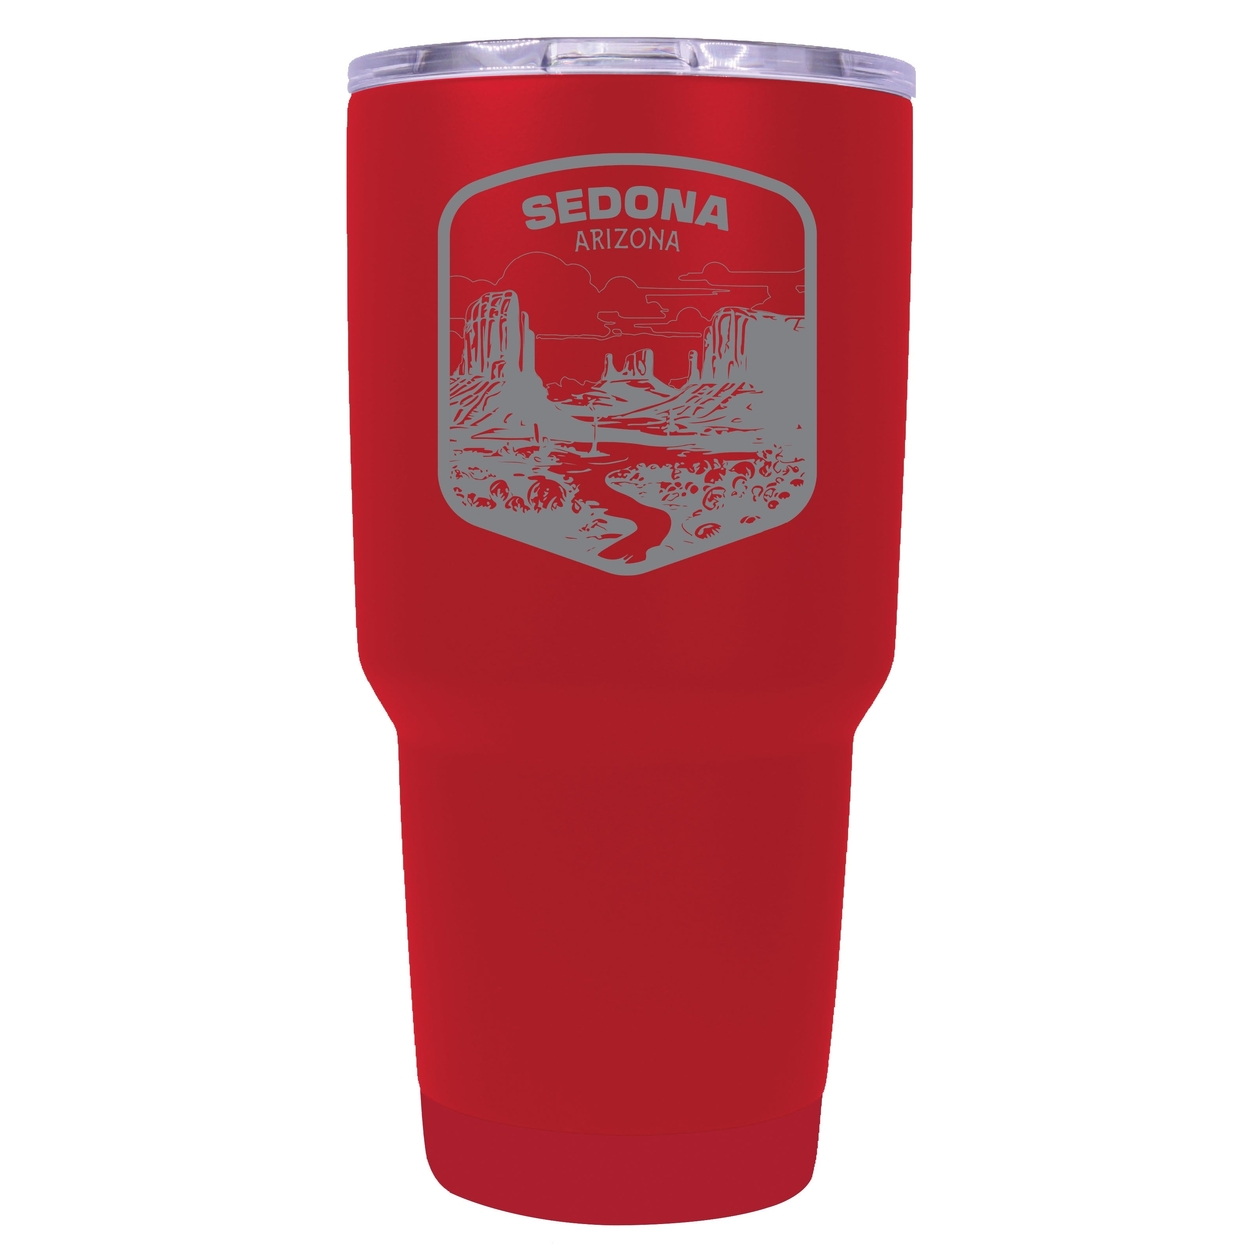 Sedona Arizona Souvenir 24 Oz Engraved Insulated Stainless Steel Tumbler - Red,,2-Pack